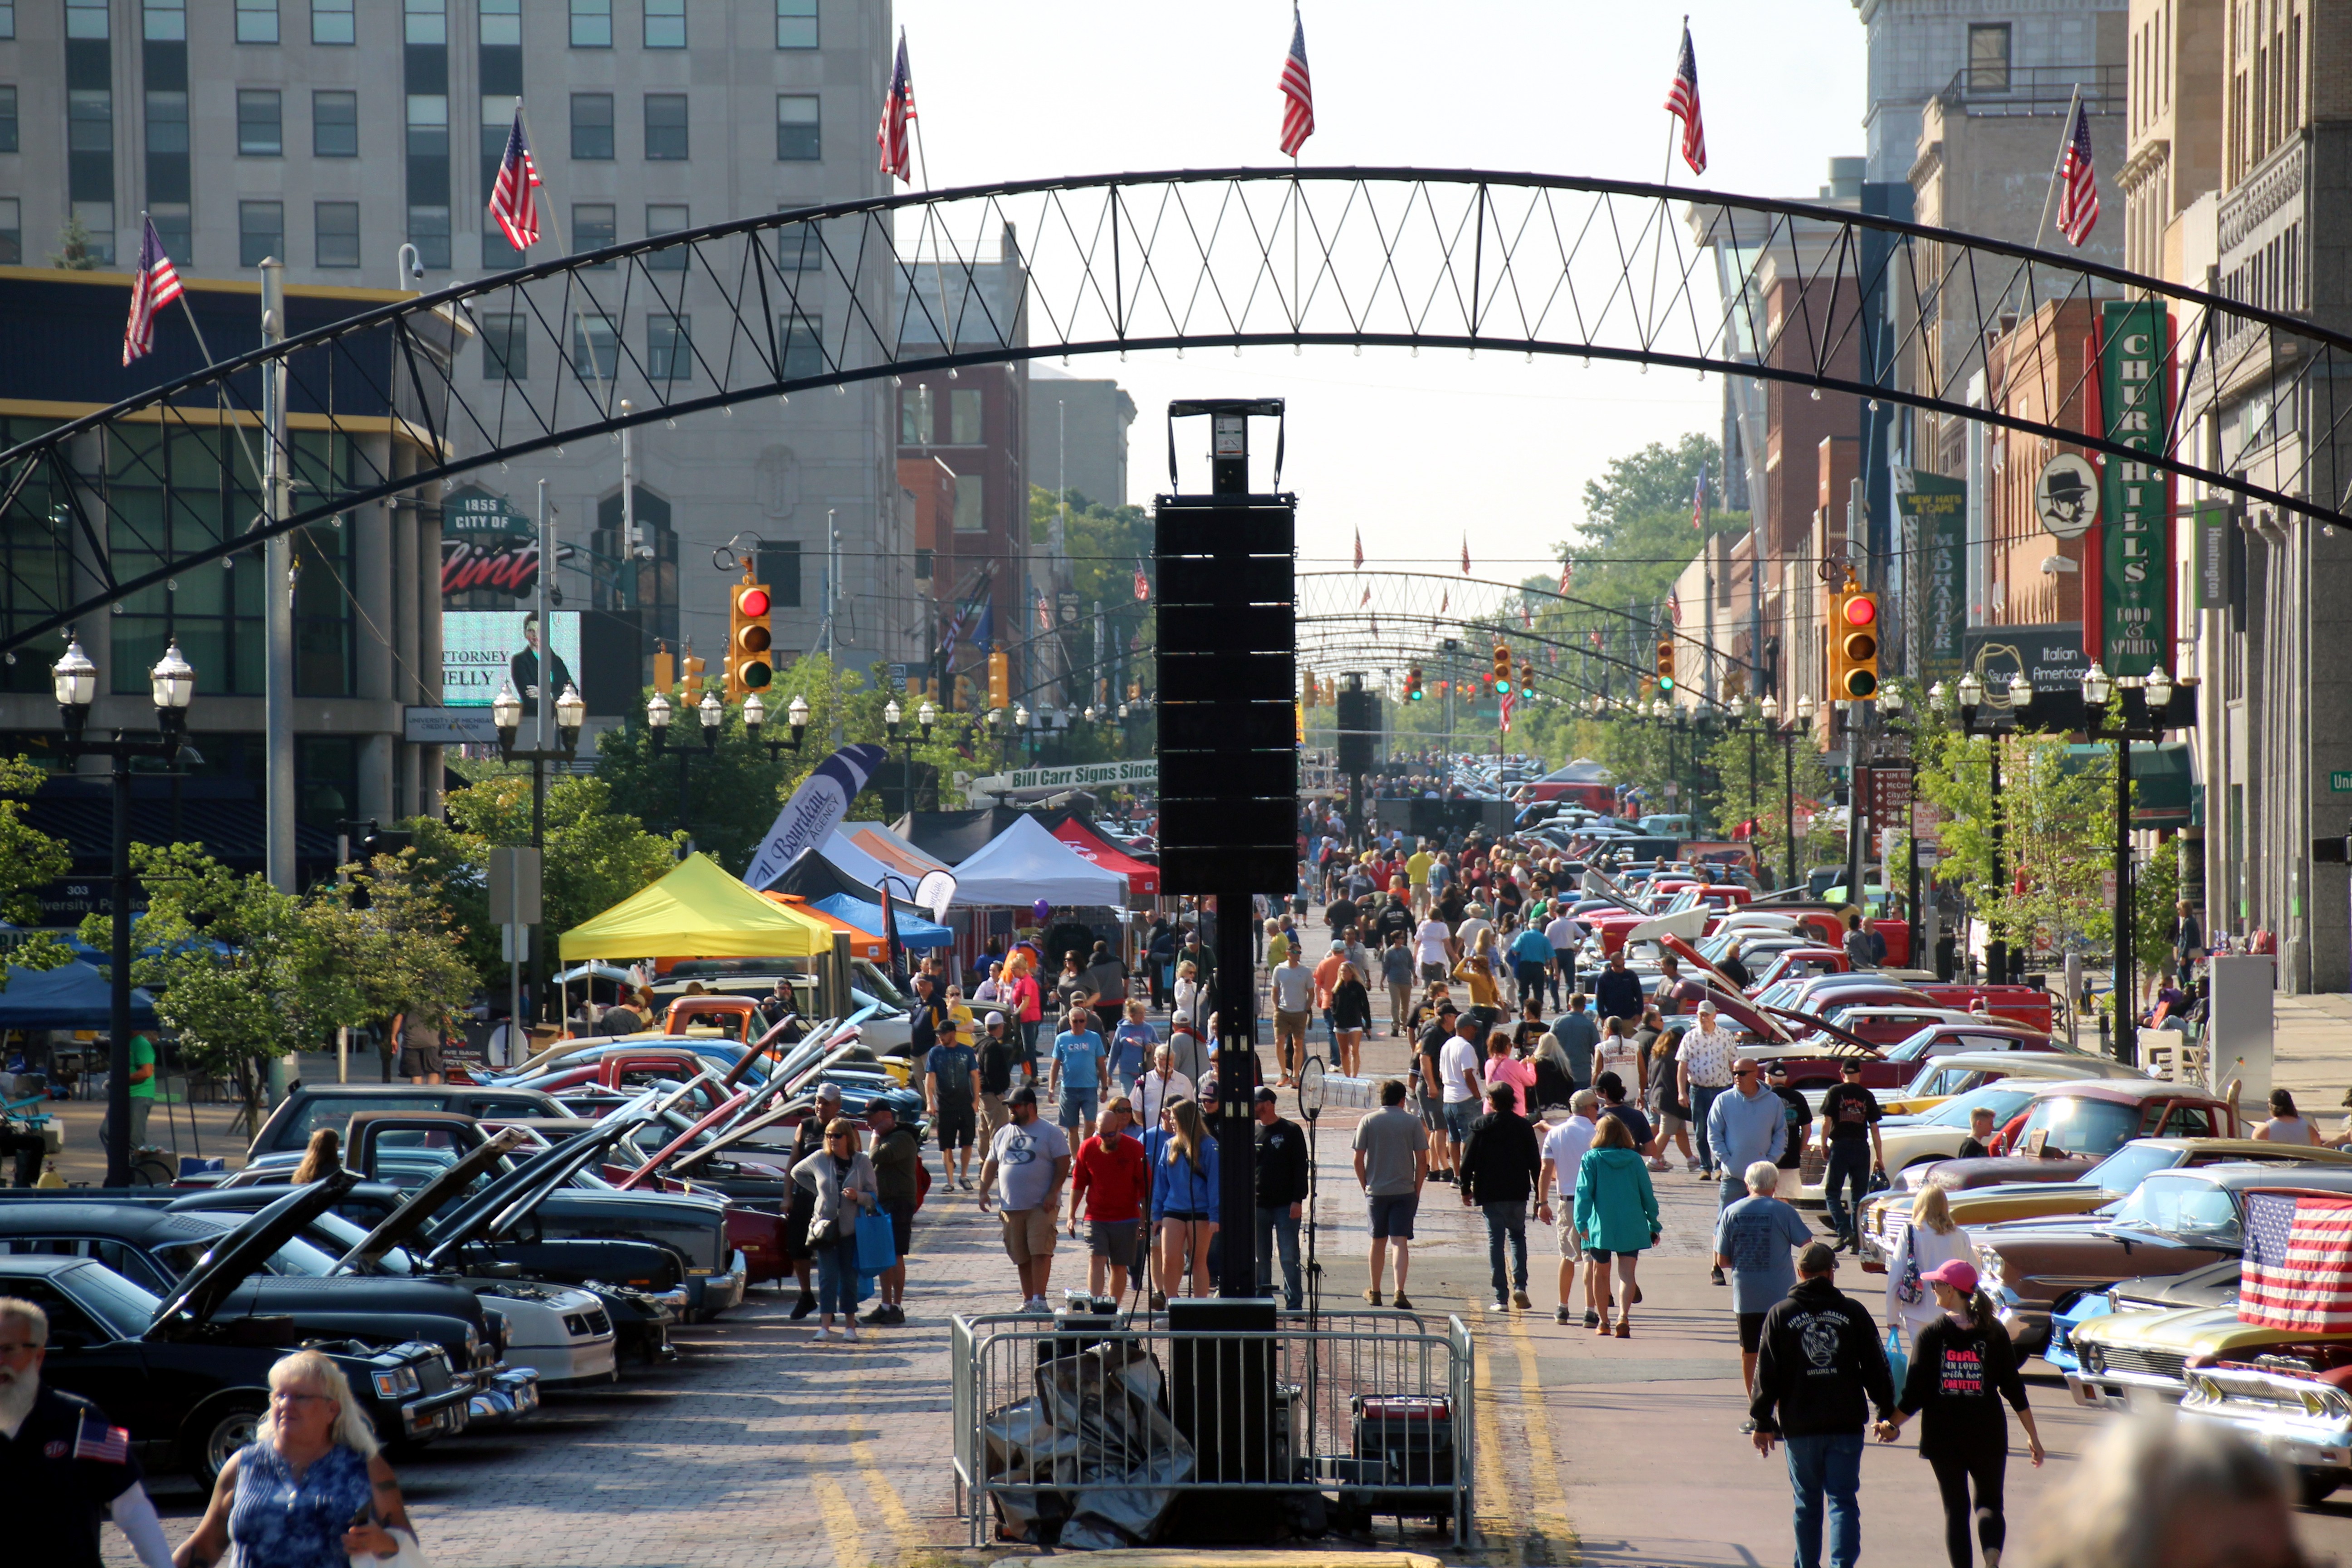 ‘Back to the Bricks’ Again Proves a Worthy Alternative to the Woodward Dream Cruise